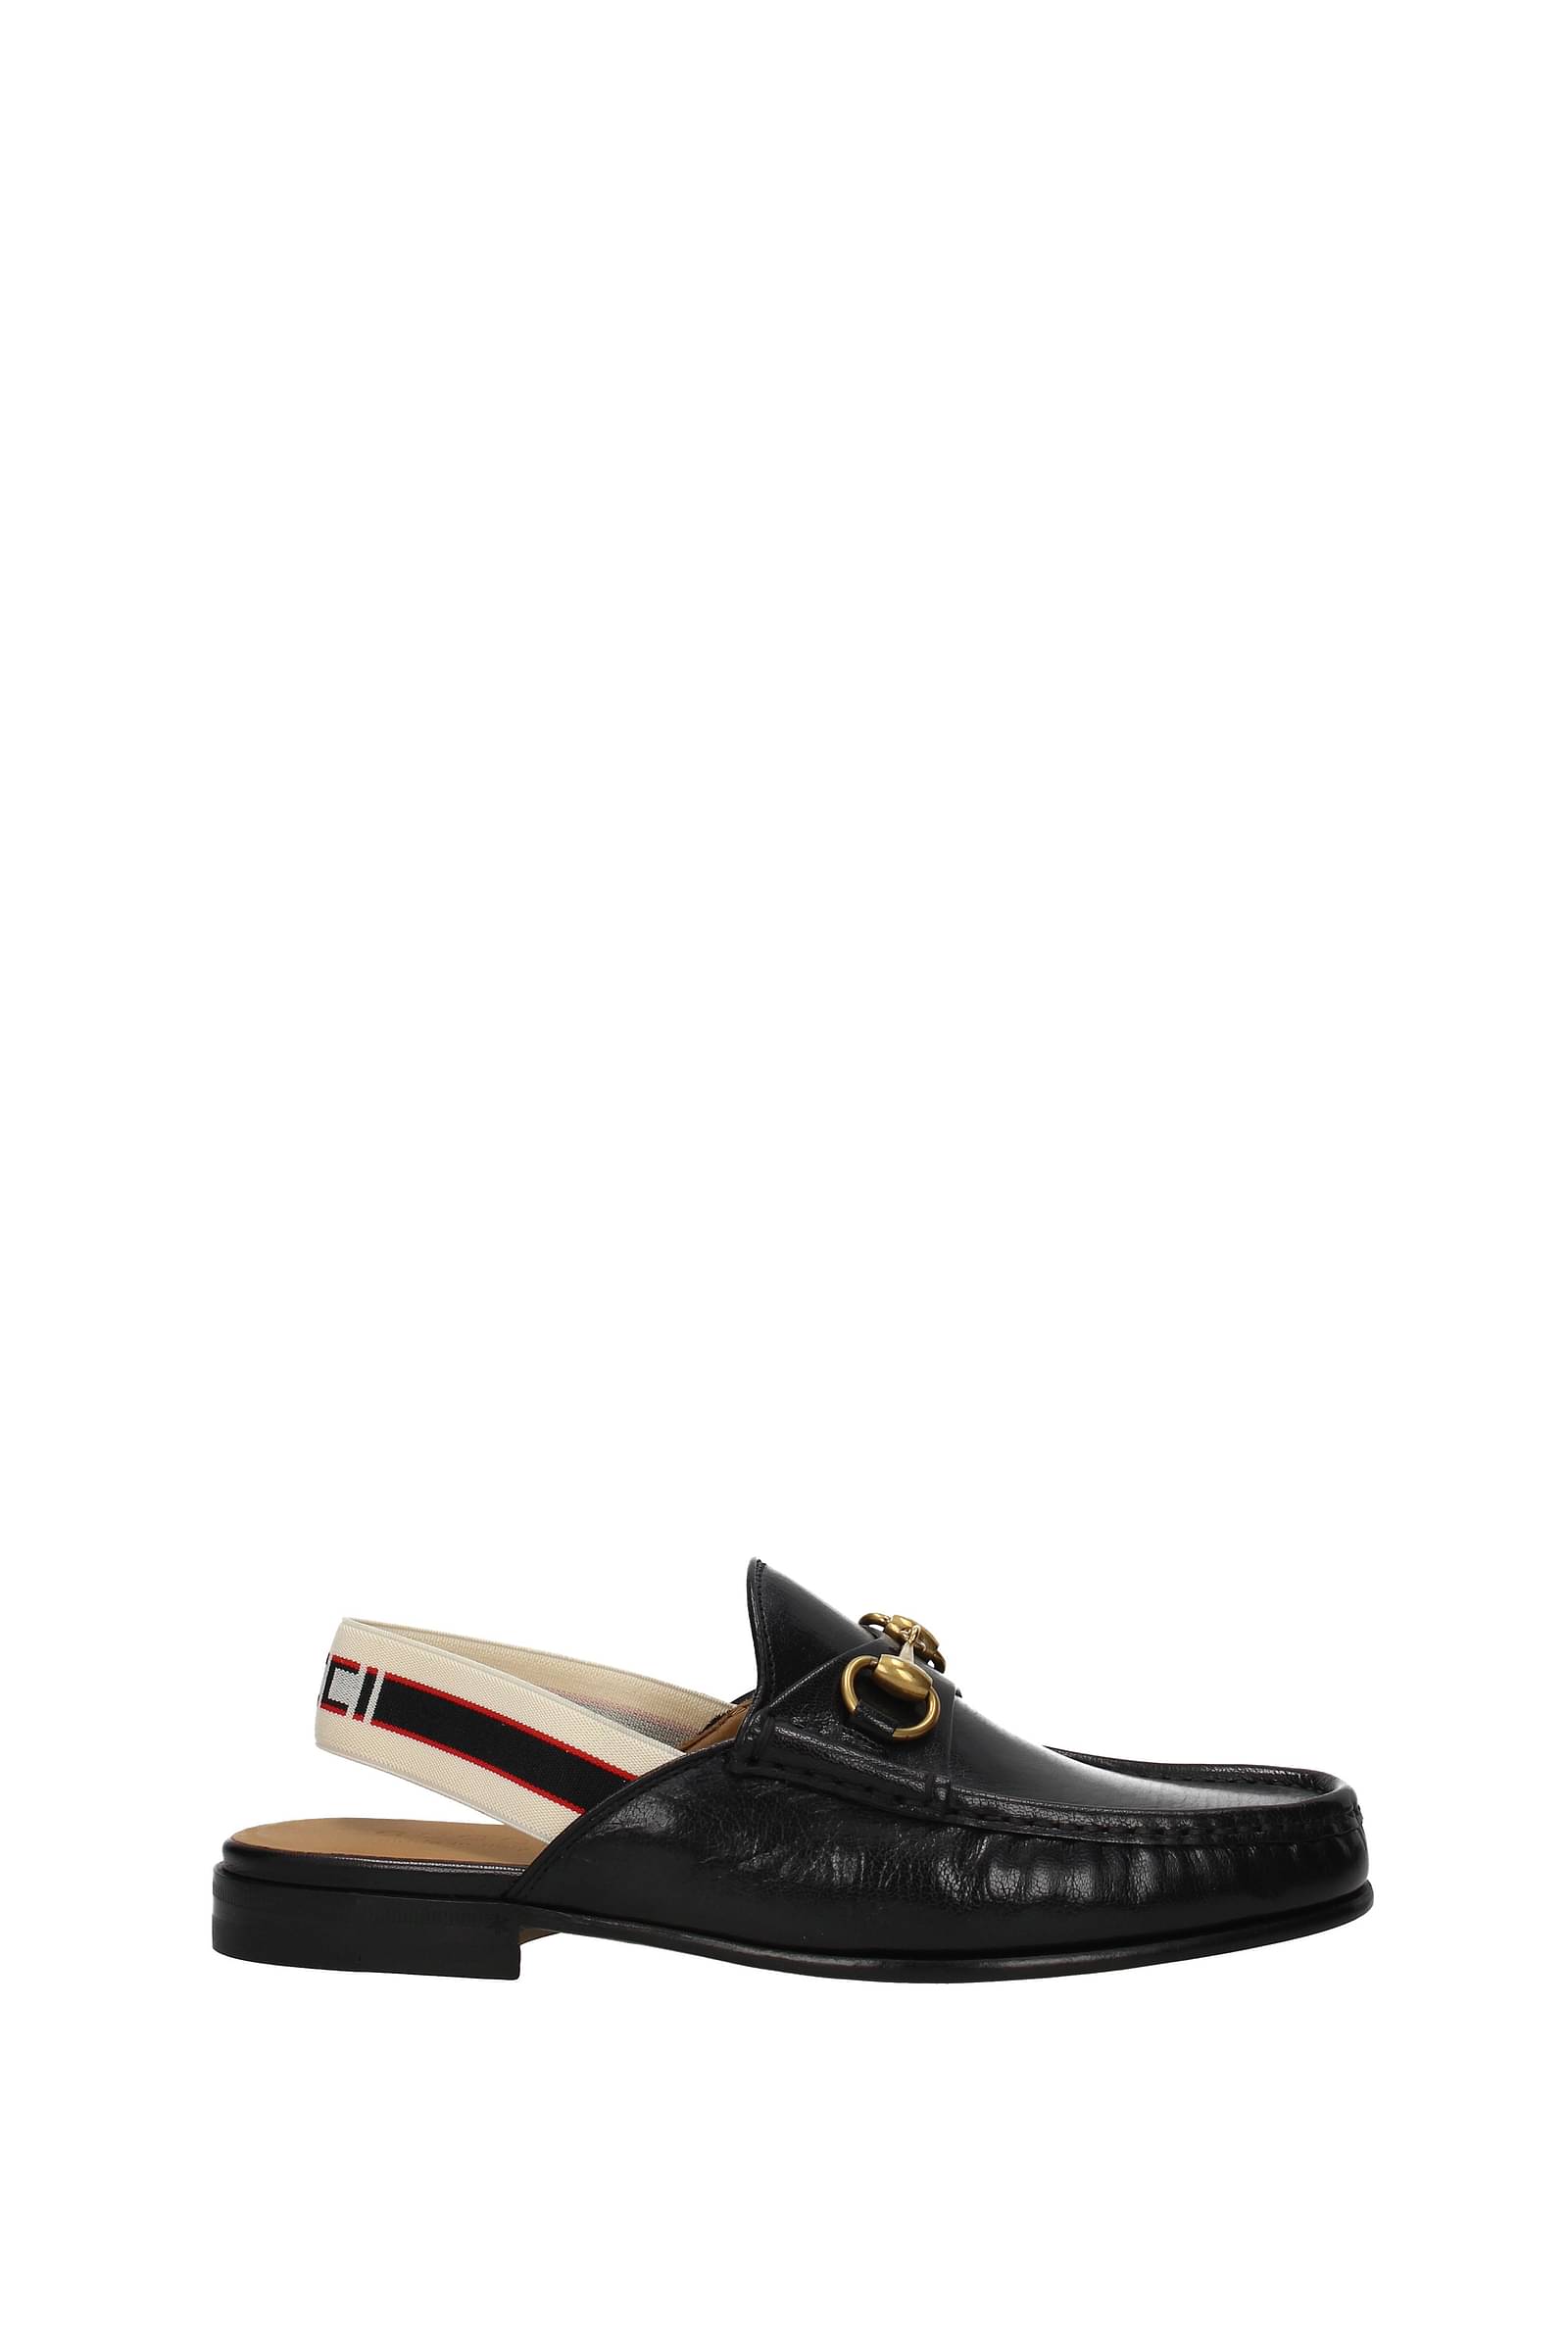 Gucci Slippers - Promotional Sale | B-Exit